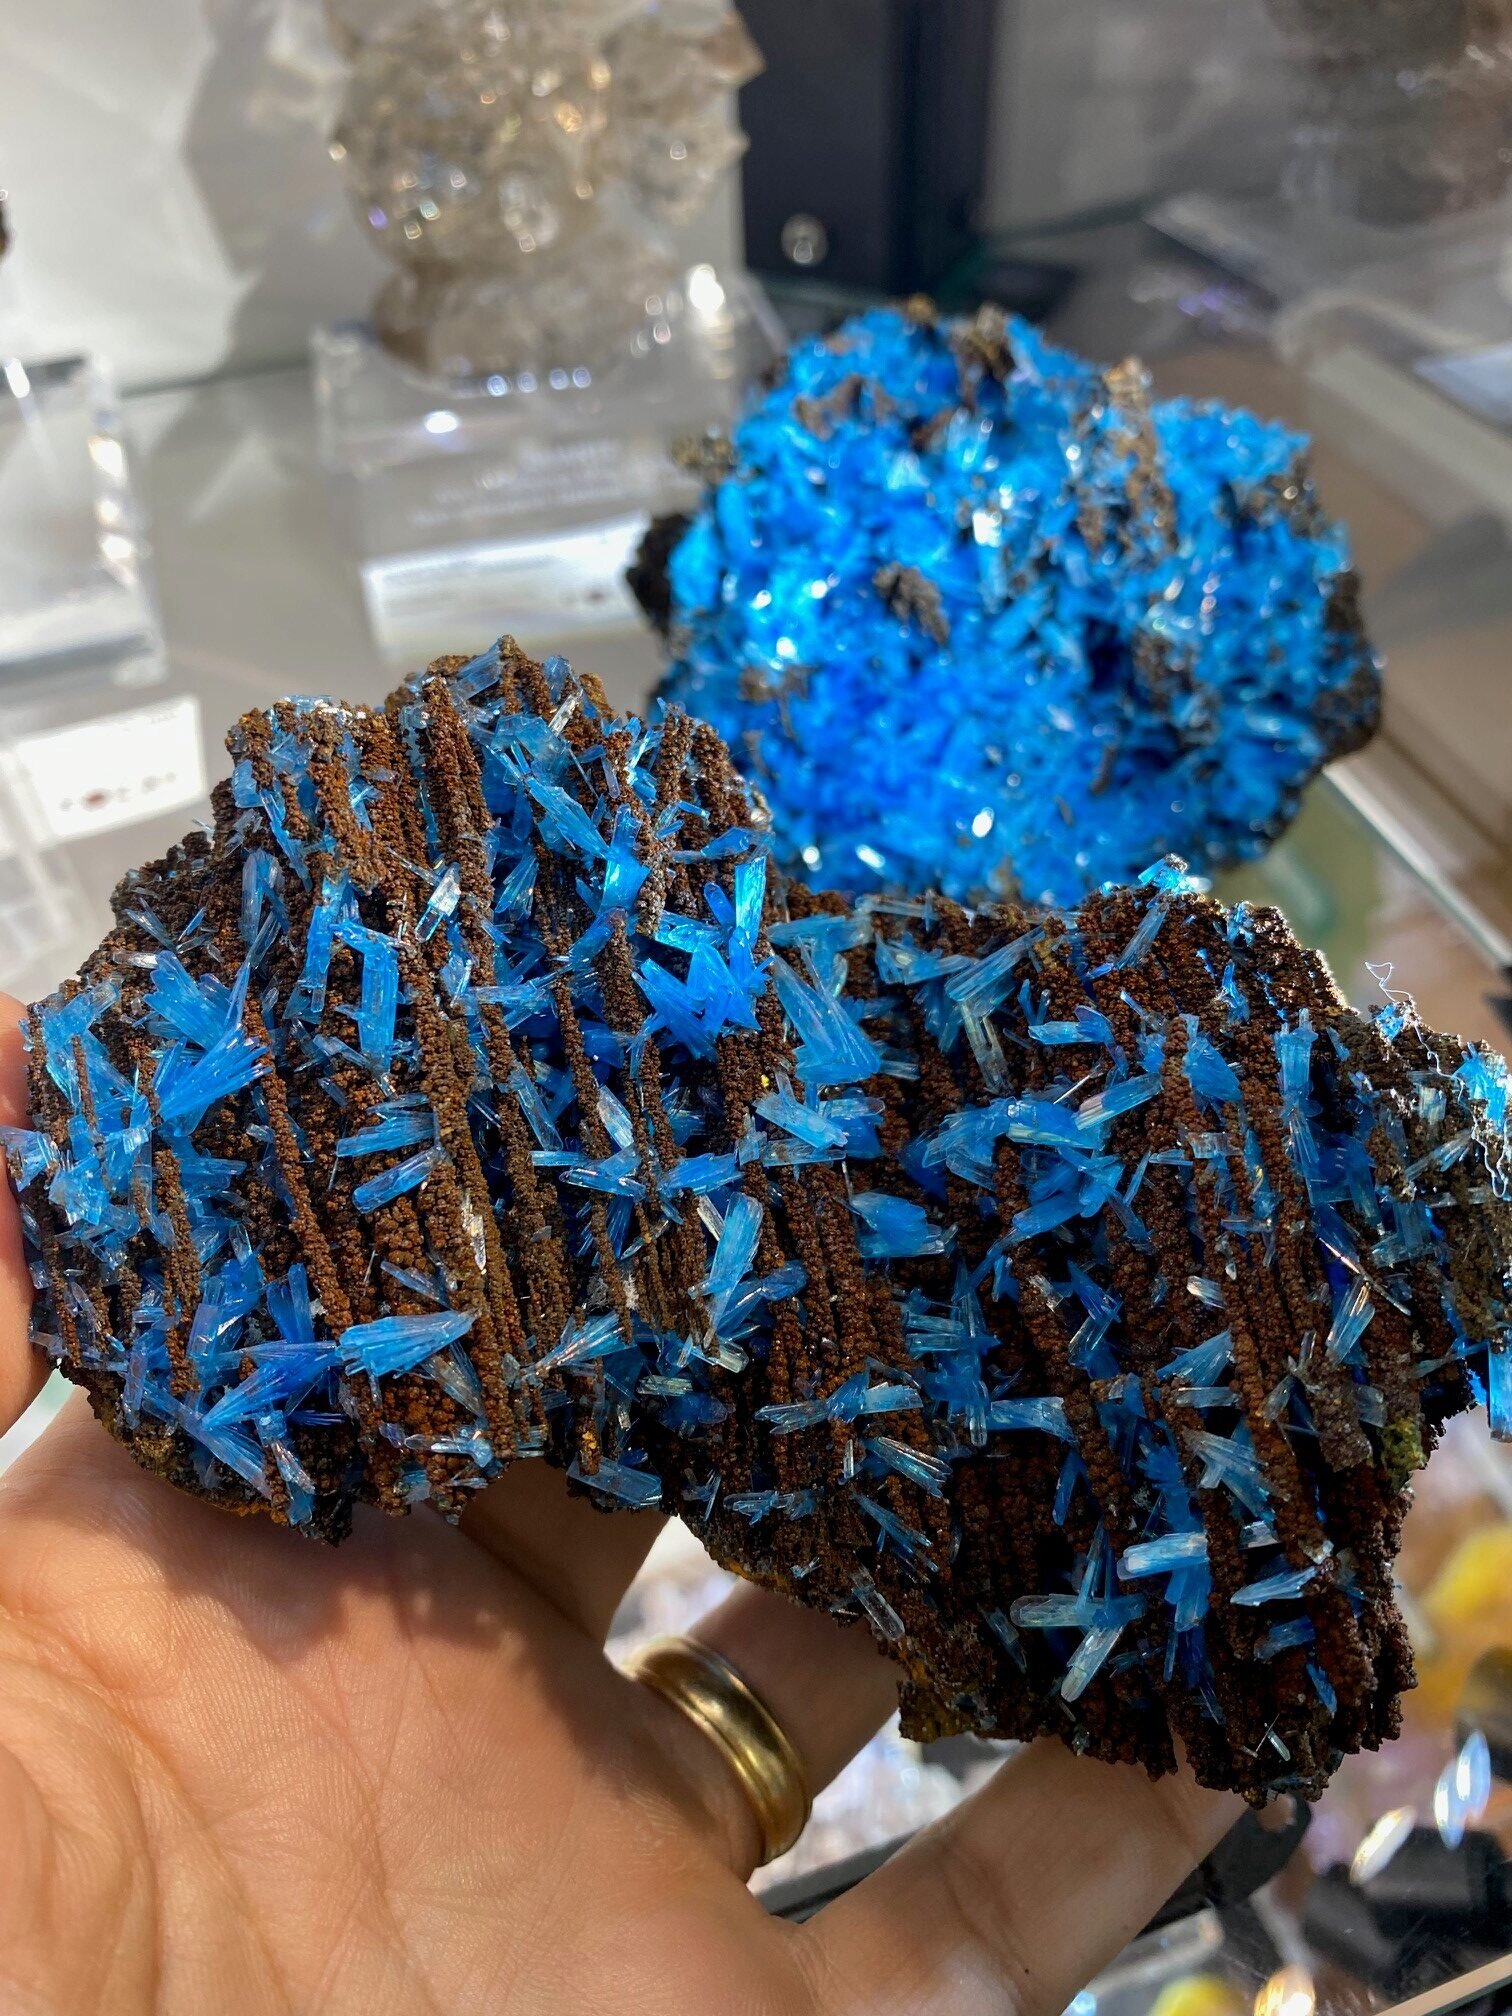 Many of us were burned by the fake Hemimorphite